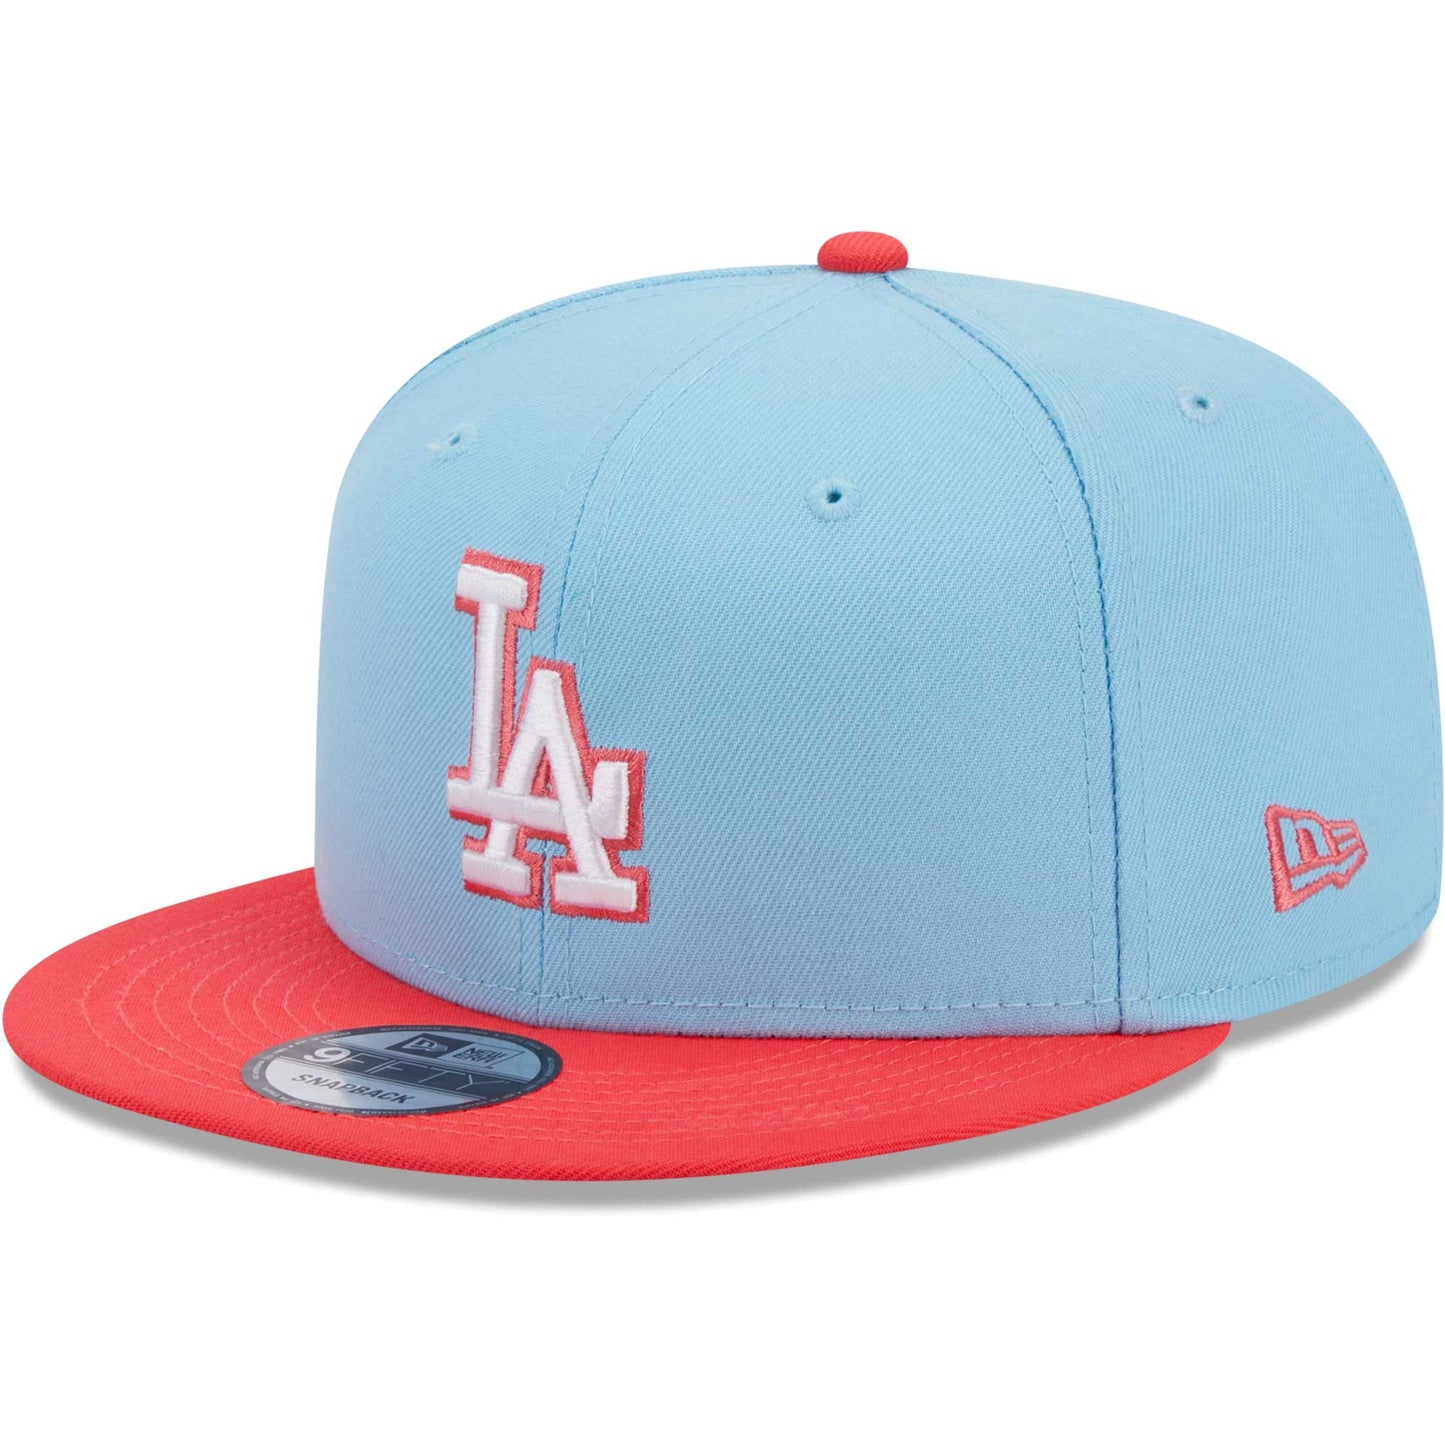 Los Angeles Dodgers New Era Spring Basic Two-Tone 9FIFTY Snapback Hat - Light Blue/Red